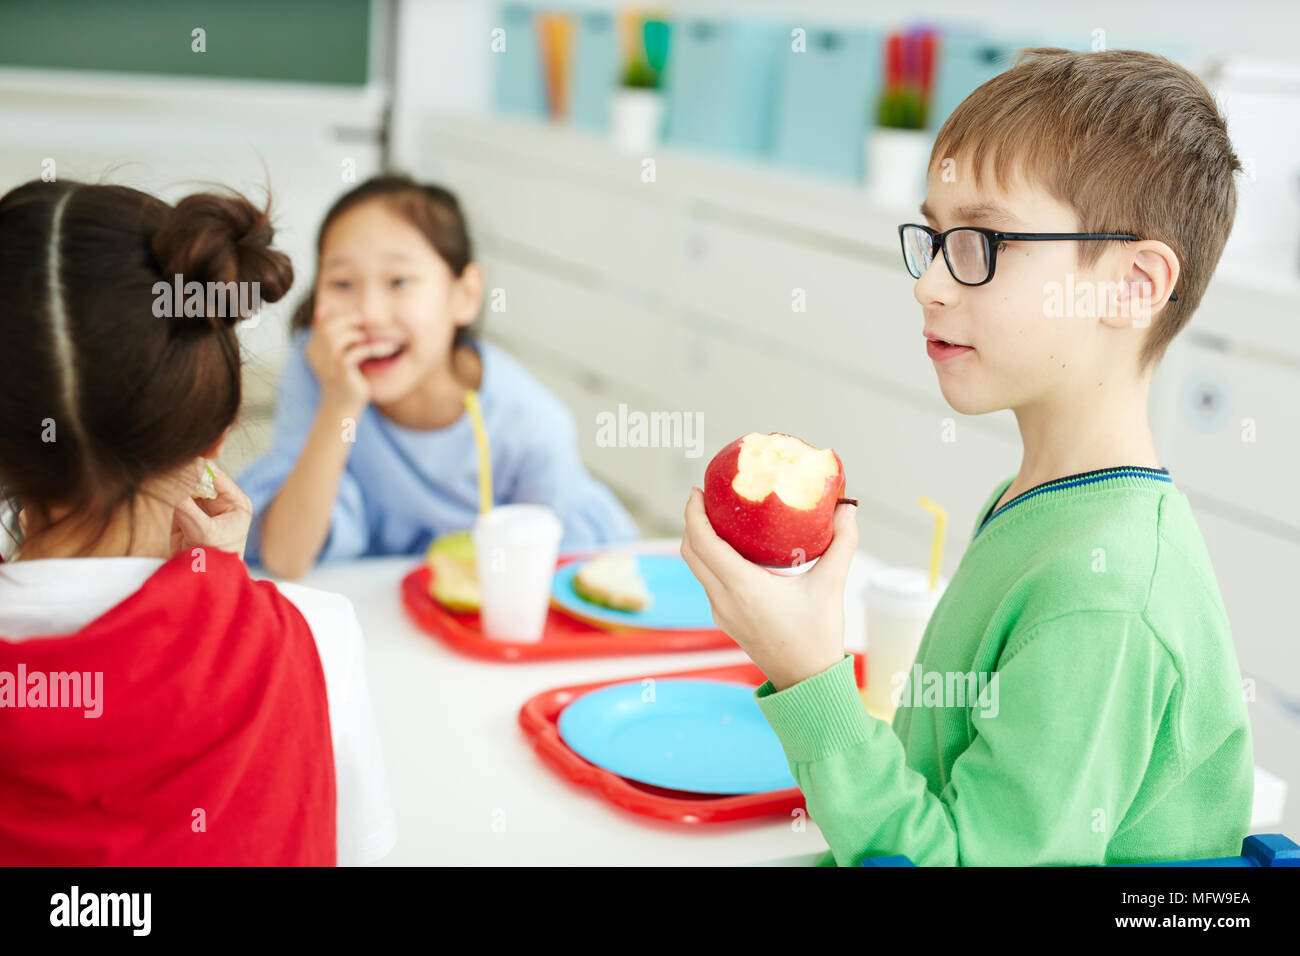 Children eating at the canteen Stock Photo by ©Wavebreakmedia 108962978